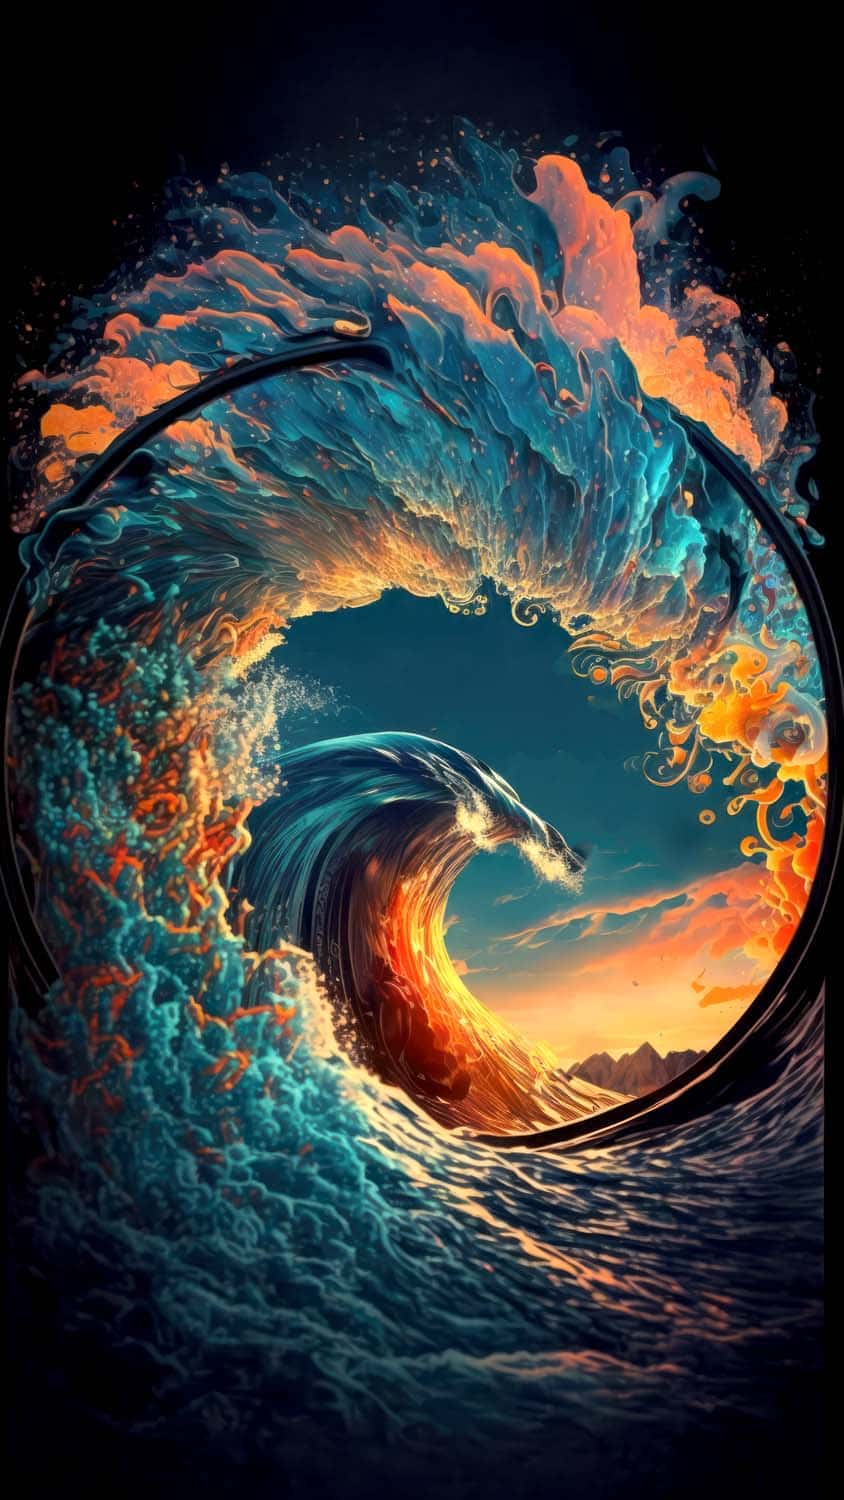 The Wave IPhone Wallpaper HD  IPhone Wallpapers